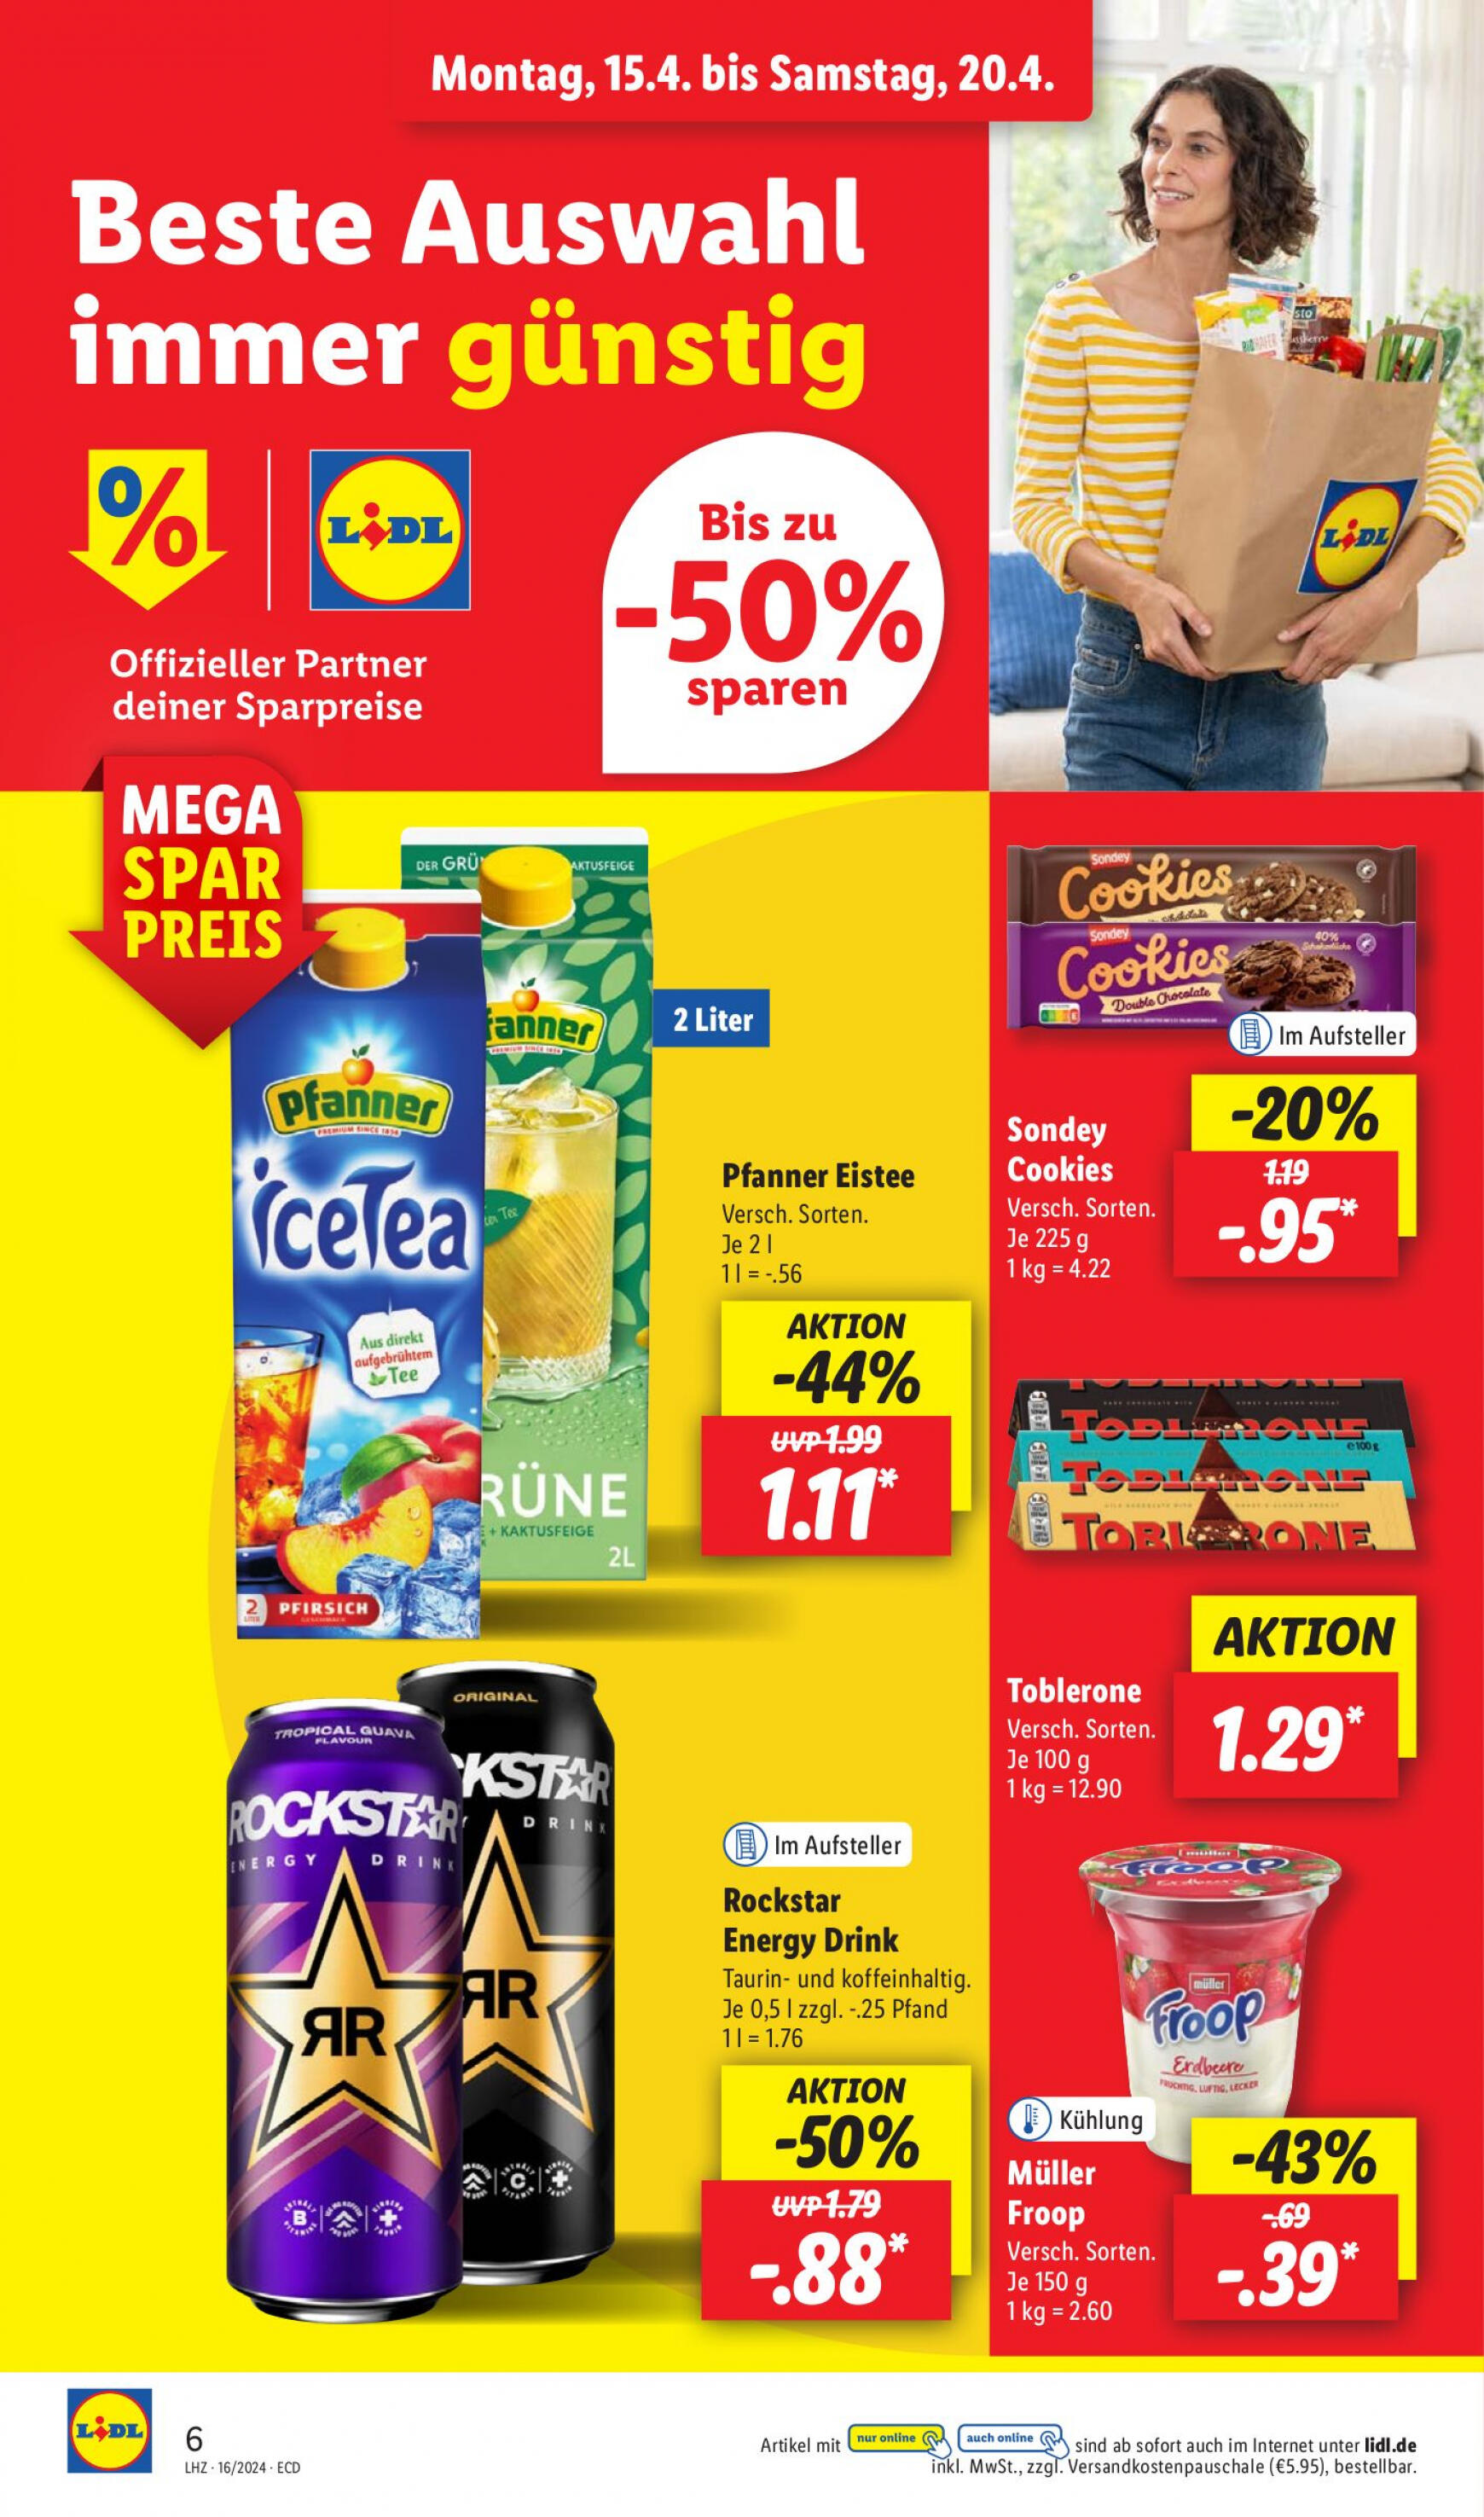 lidl - Flyer Lidl aktuell 15.04. - 20.04. - page: 10